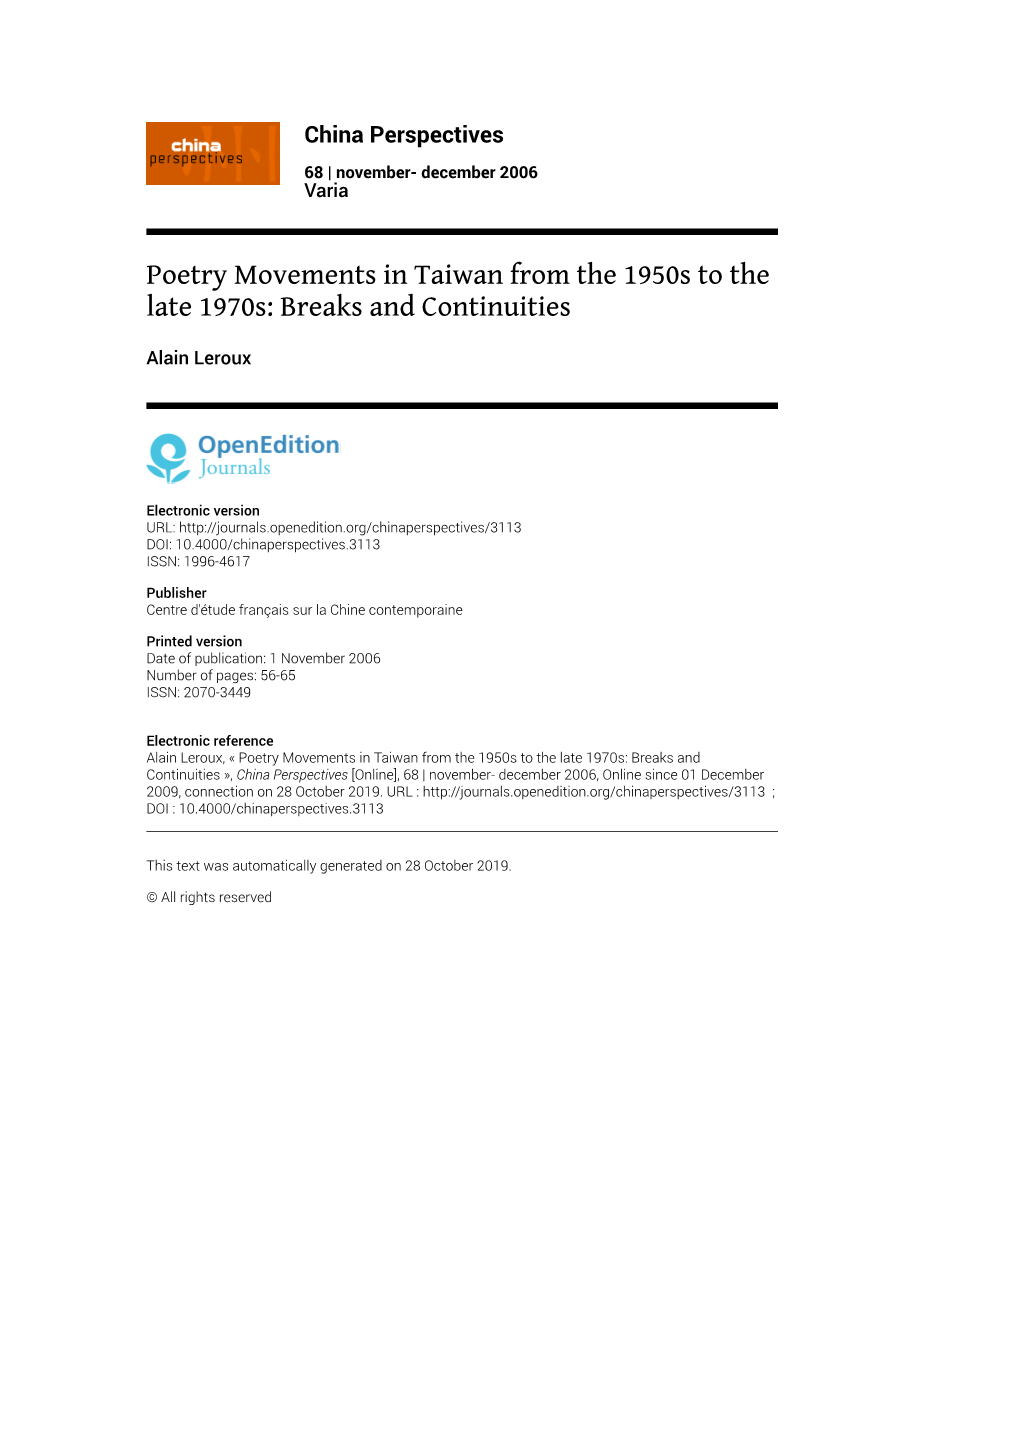 China Perspectives, 68 | November- December 2006 Poetry Movements in Taiwan from the 1950S to the Late 1970S: Breaks and Conti